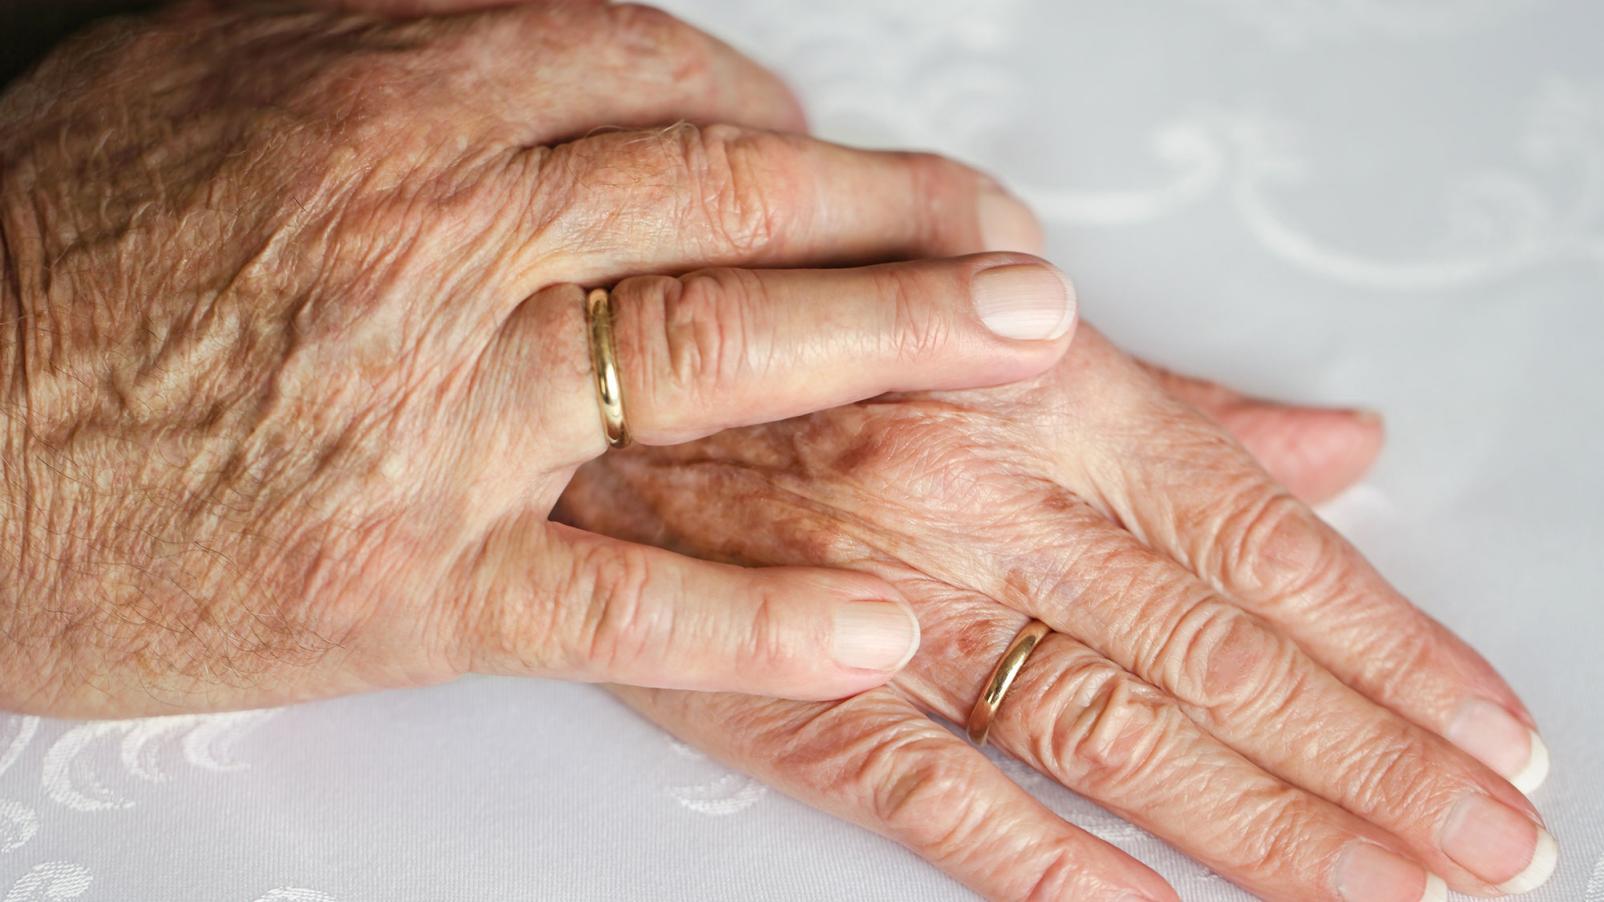 Close up photo of a hand on another hand showing care